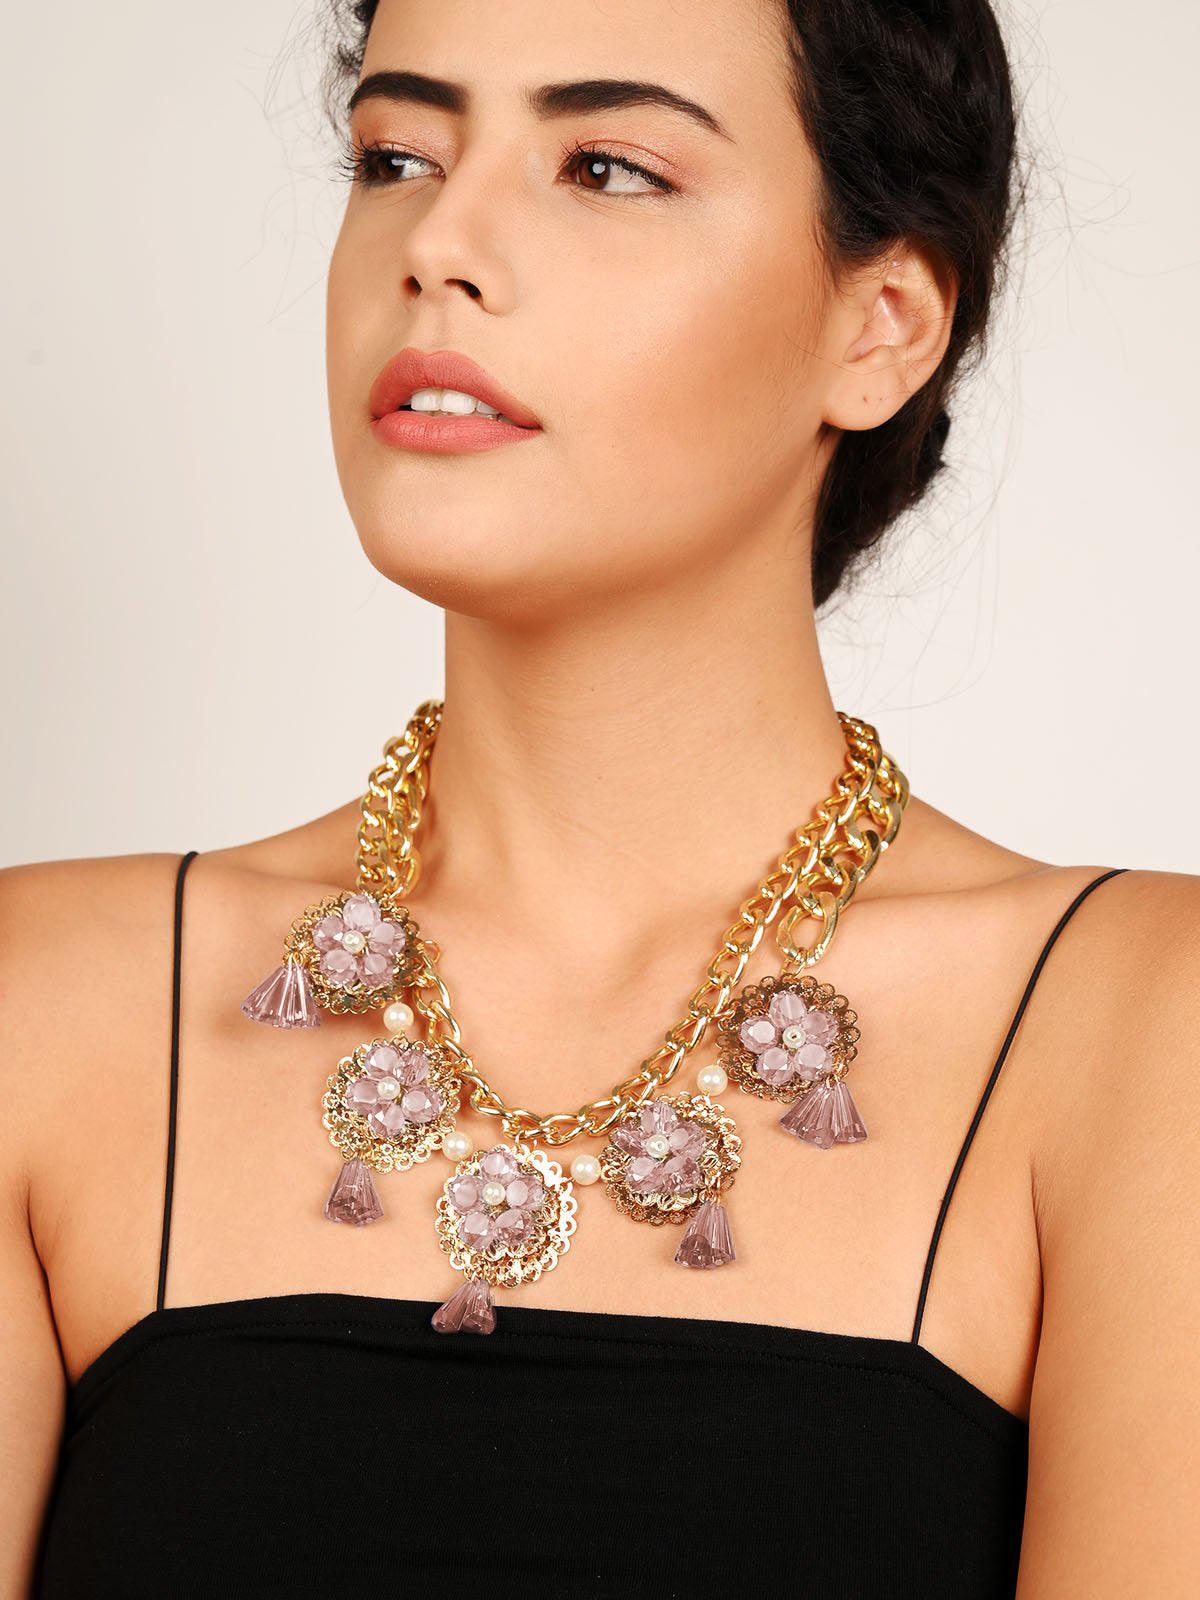 Courtney Neon Pink Crystal Encrusted Spike Scalloped Statement Necklace